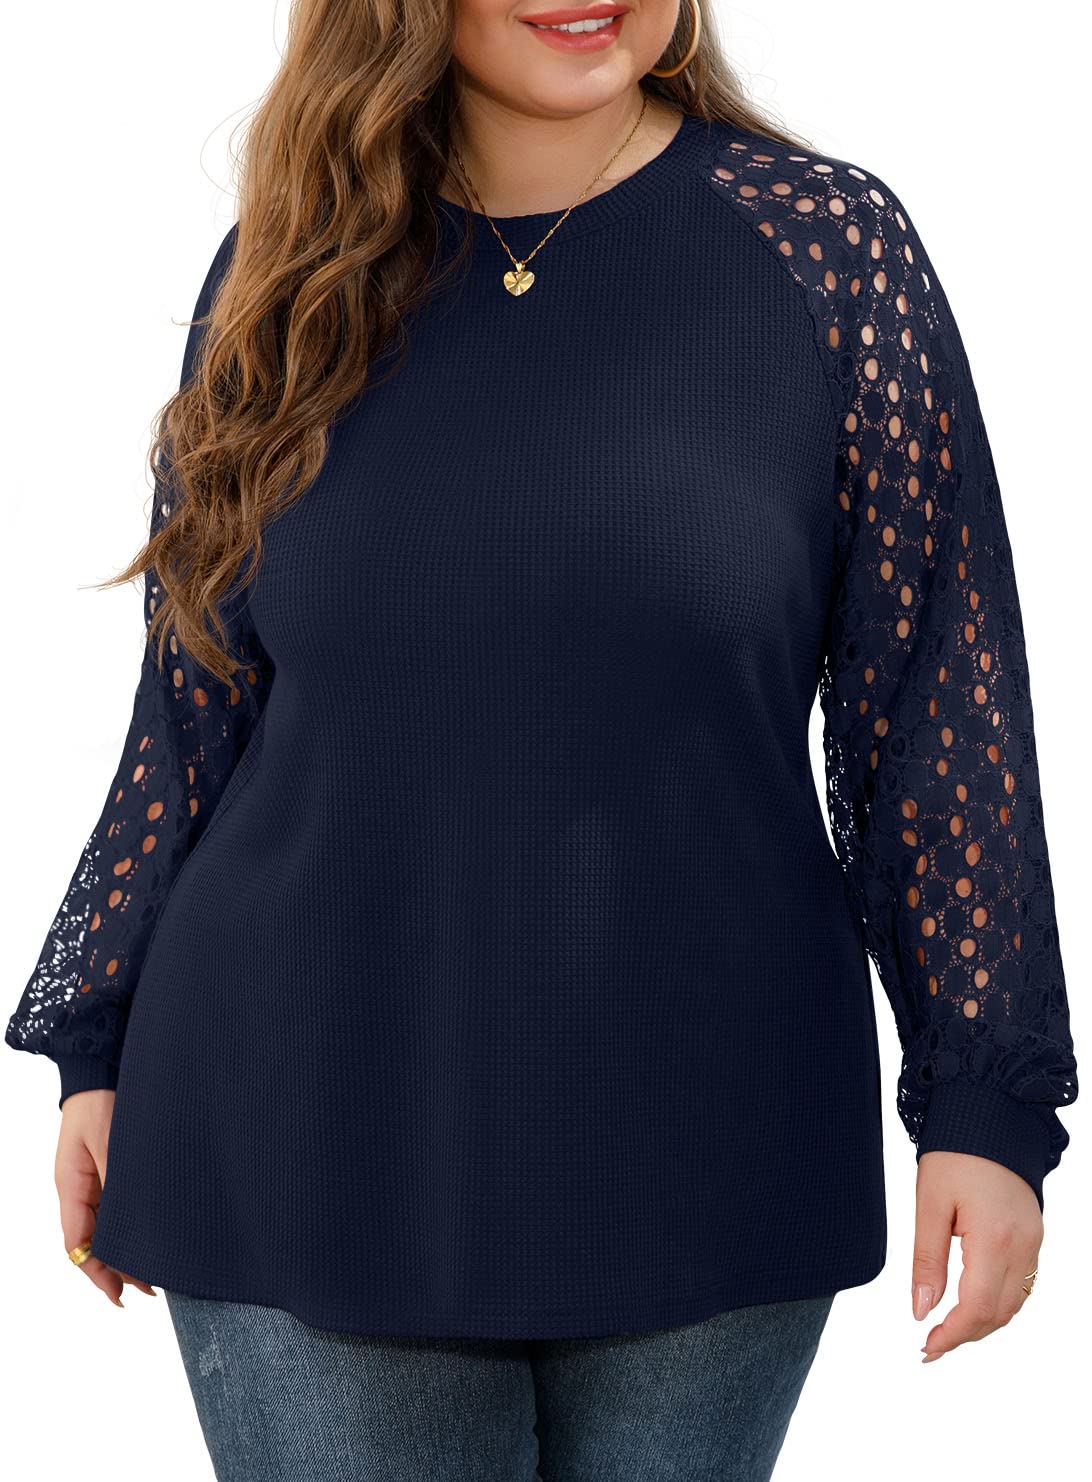 OLRIK Plus Size Tops for Women Lace Sleeve Blouse Waffle Knit Long Sleeve  Shirts Navy Blue-1X